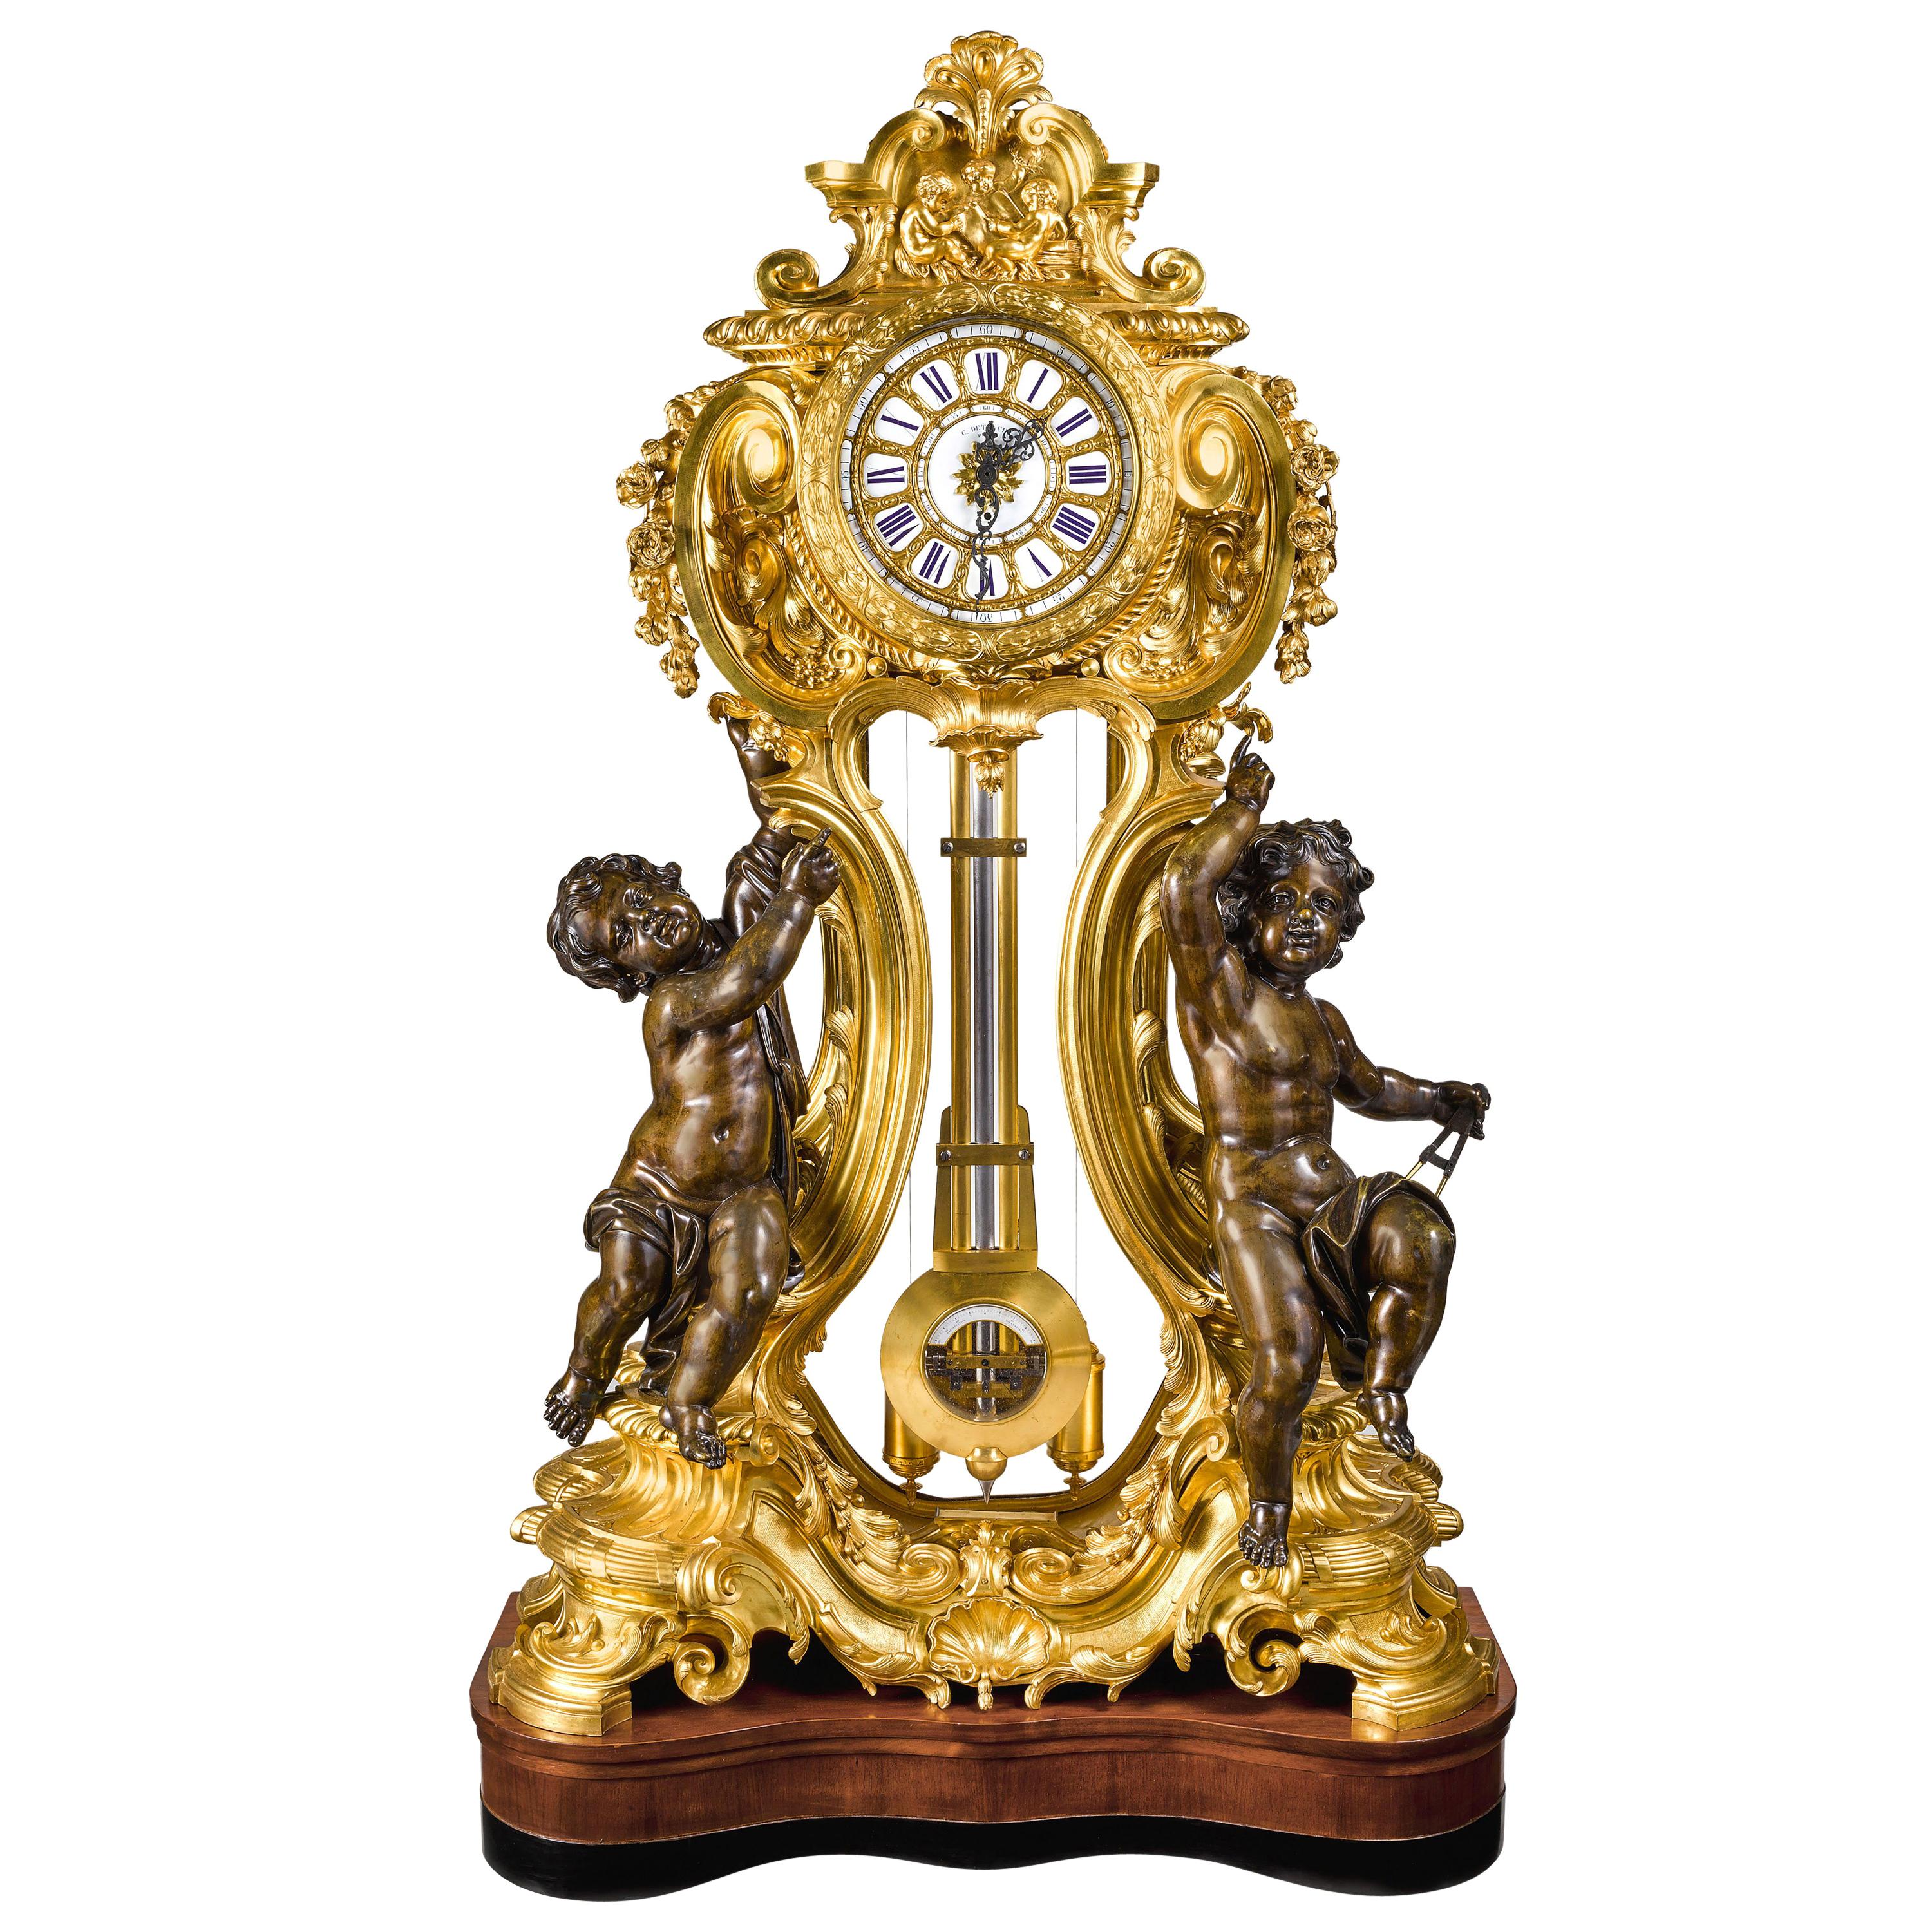 A palatial, extremely rare, and important Napoleon III French ormolu and patinated bronze regulateur de parquet clock, by Louis-Constantin Detouche, Paris, circa 1850.

The clock case made form the finest French ormolu, with 2 very large patinated